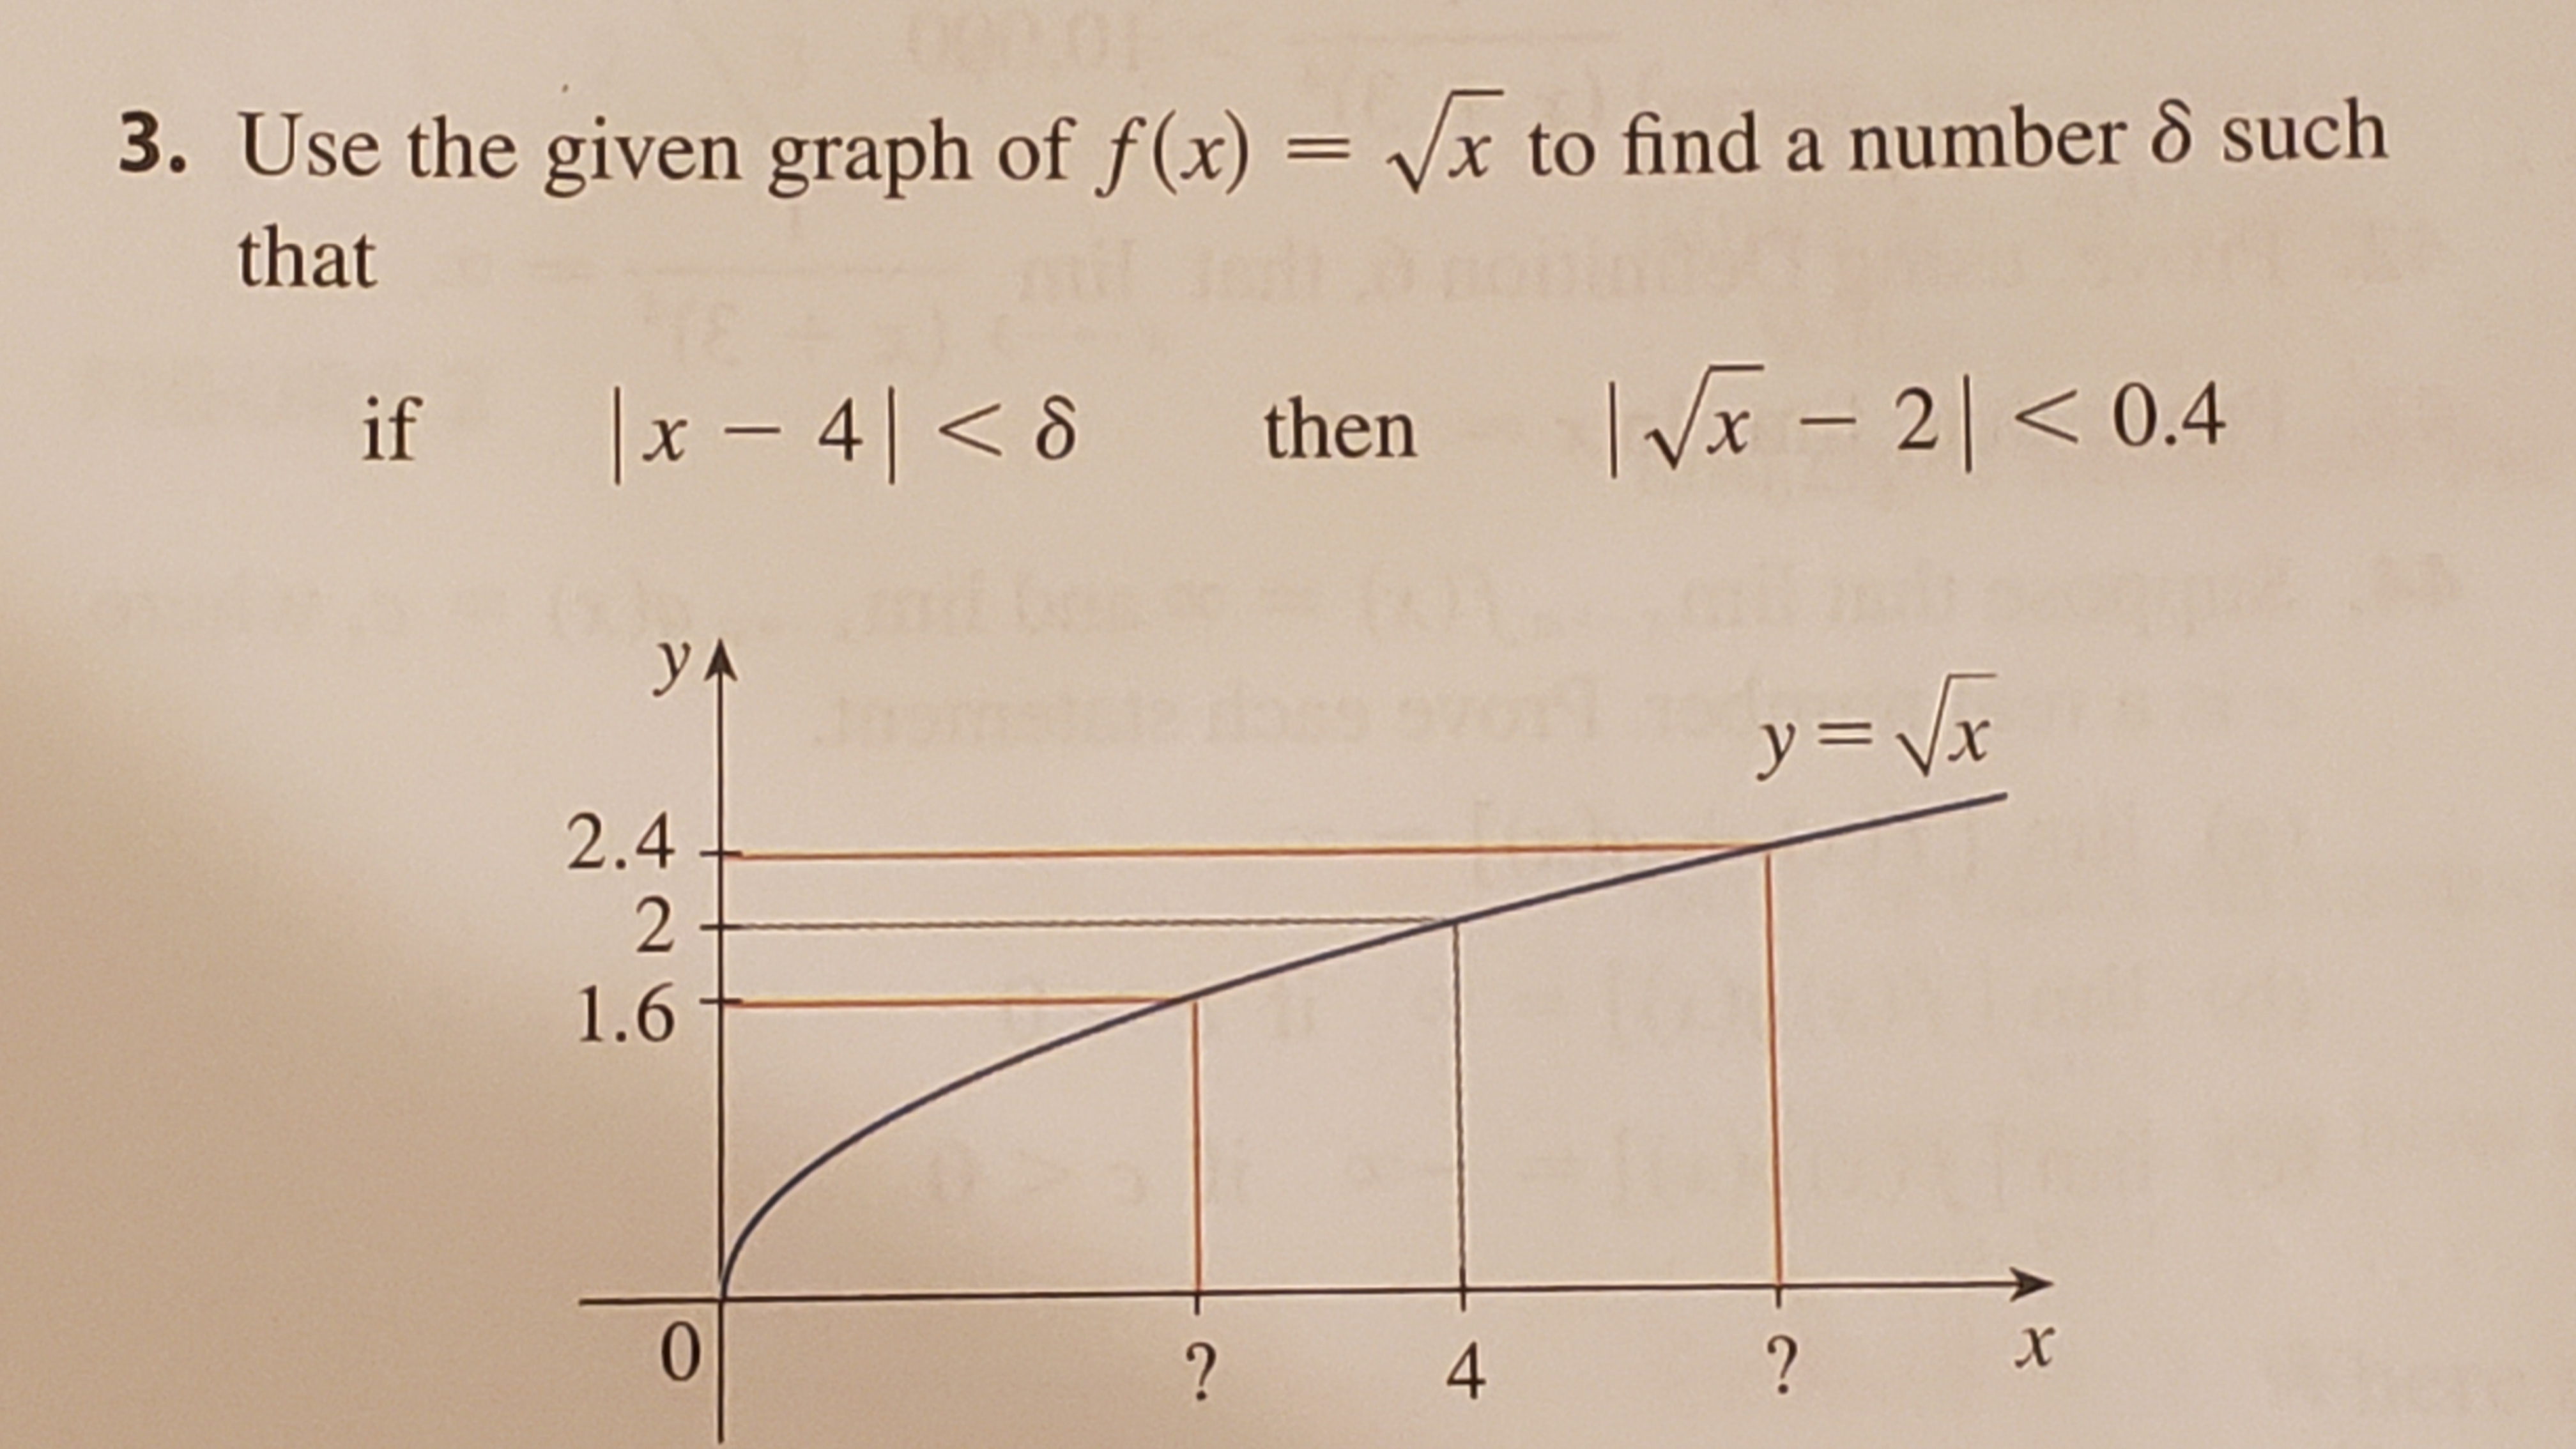 3. Use the given graph of f(x) = vx to find a number 8 such
that
IVx - 20.4
x48 then
if
yA
y Vr
2.4
2
1.6
0
x
?
?
4
